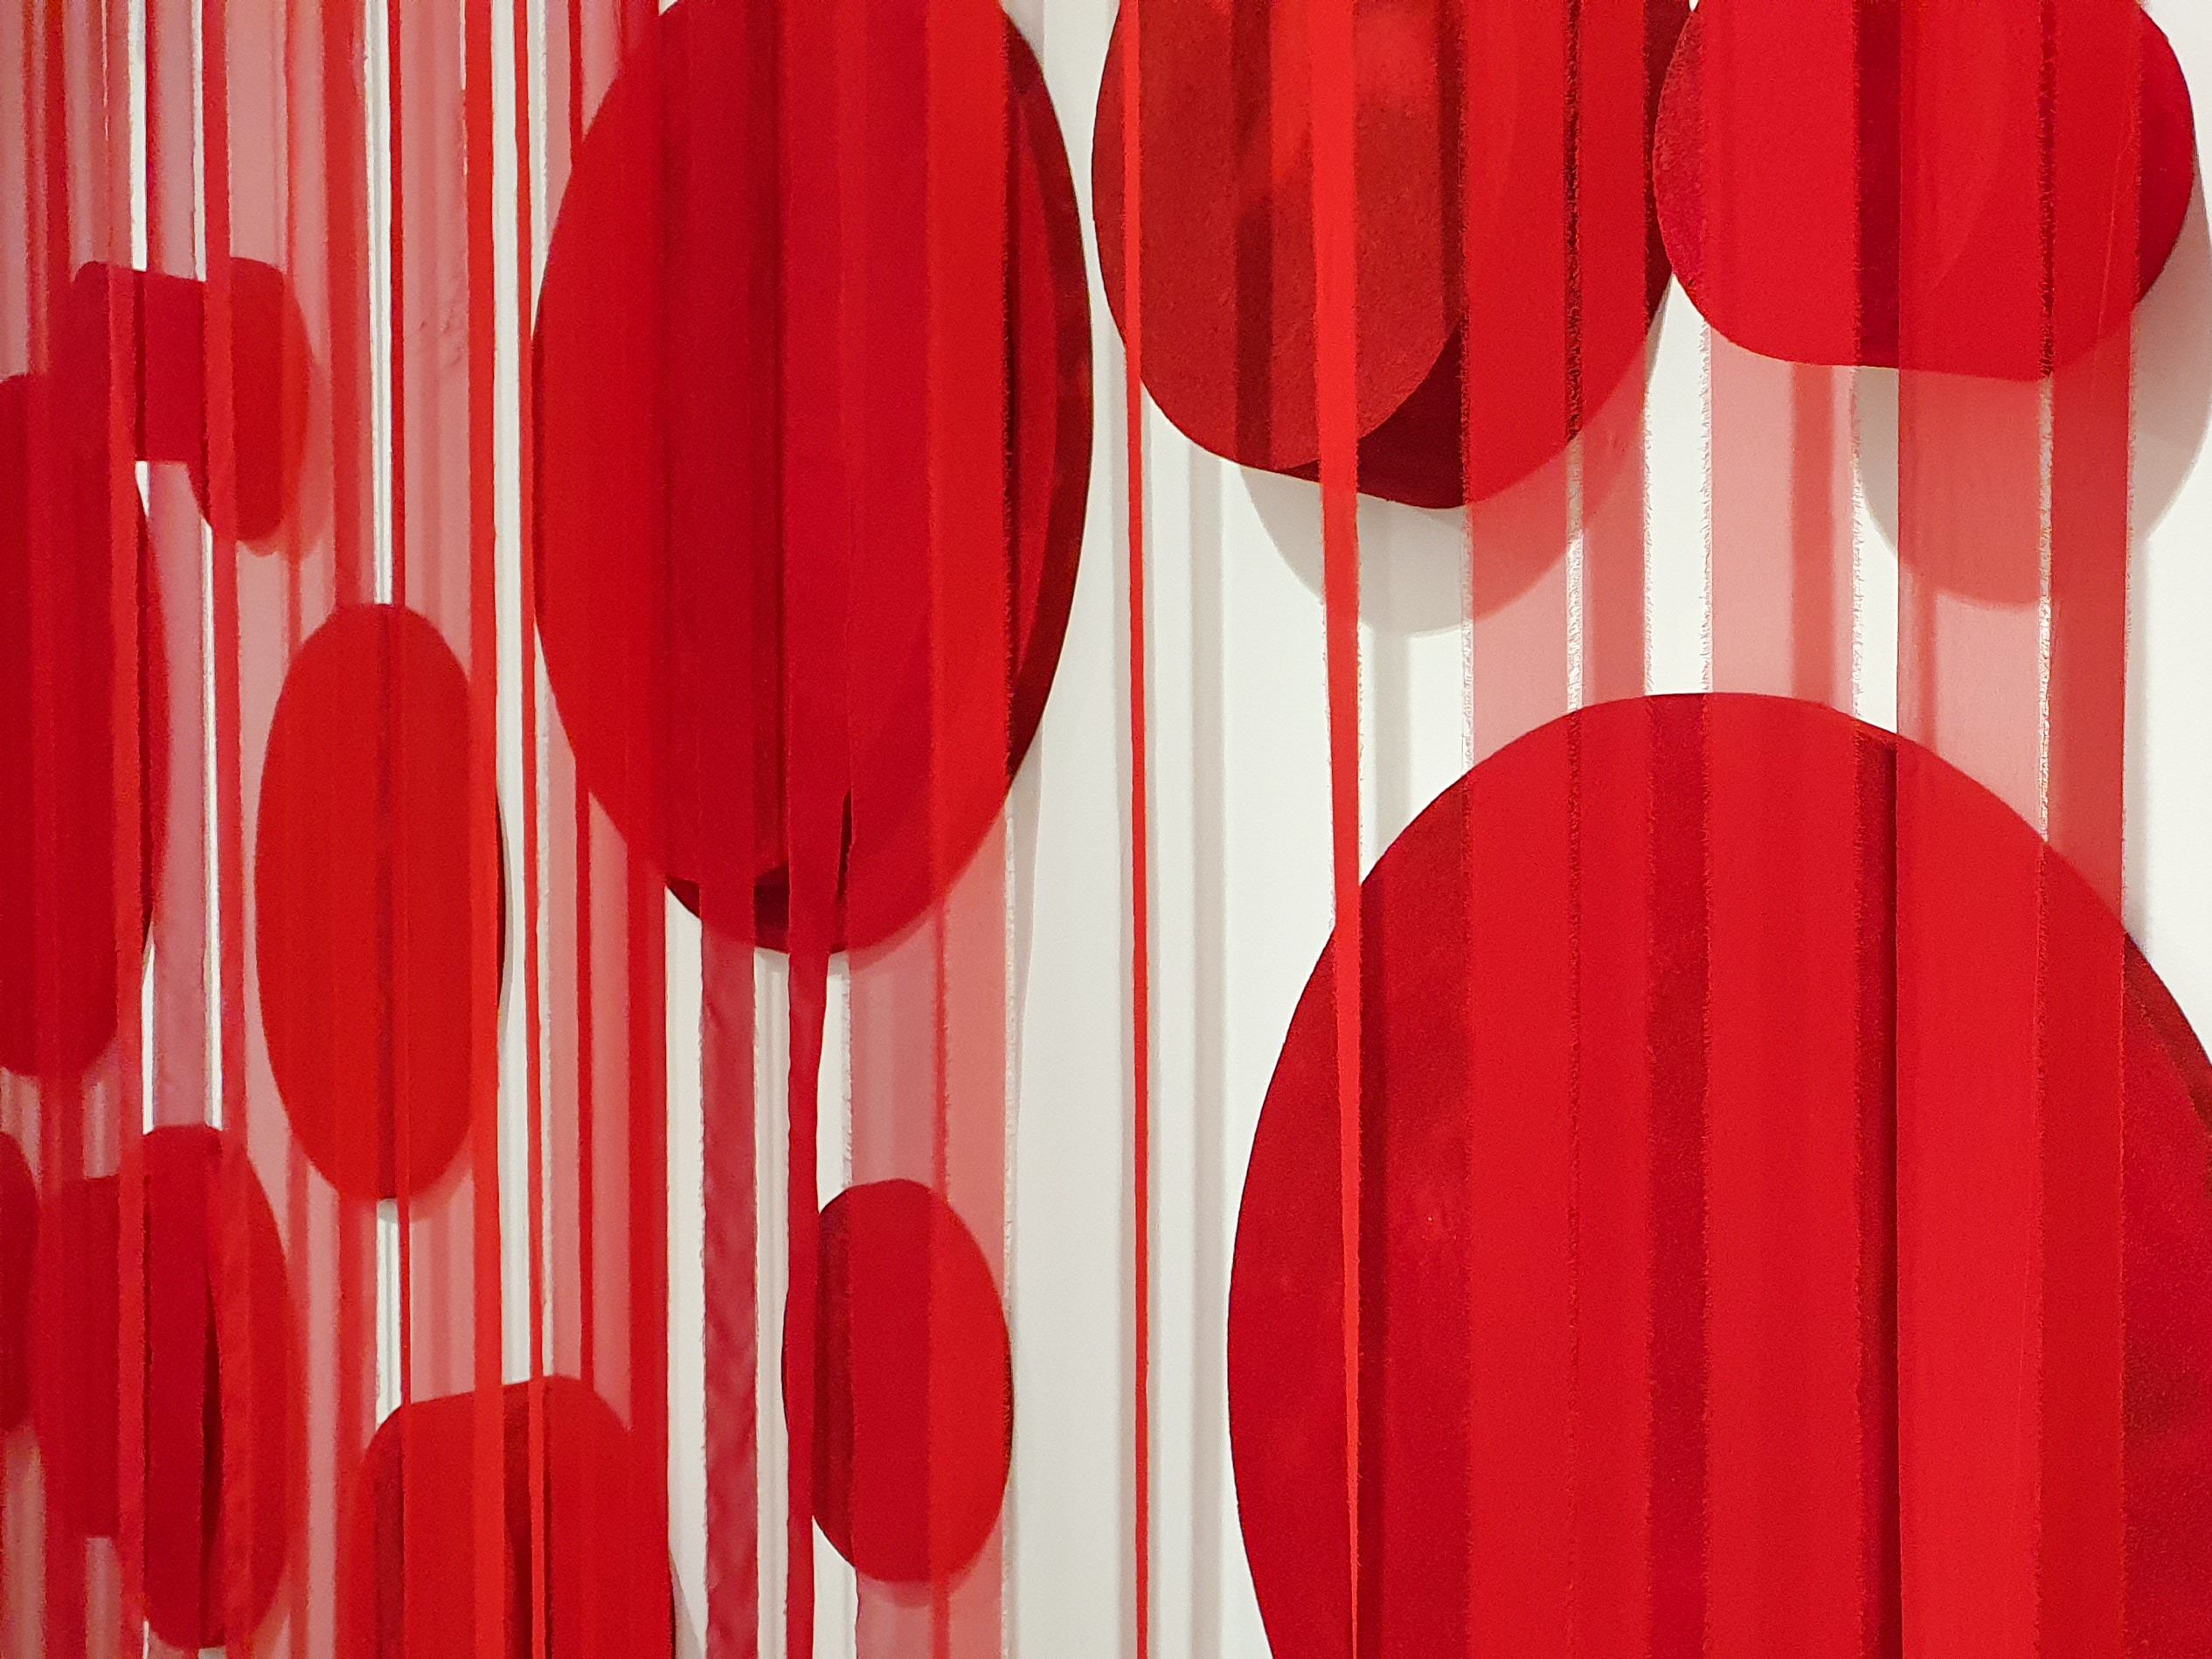 A series of red foam circles of different sizes are spread across a white wall and covered by a curtain of cloth streamers